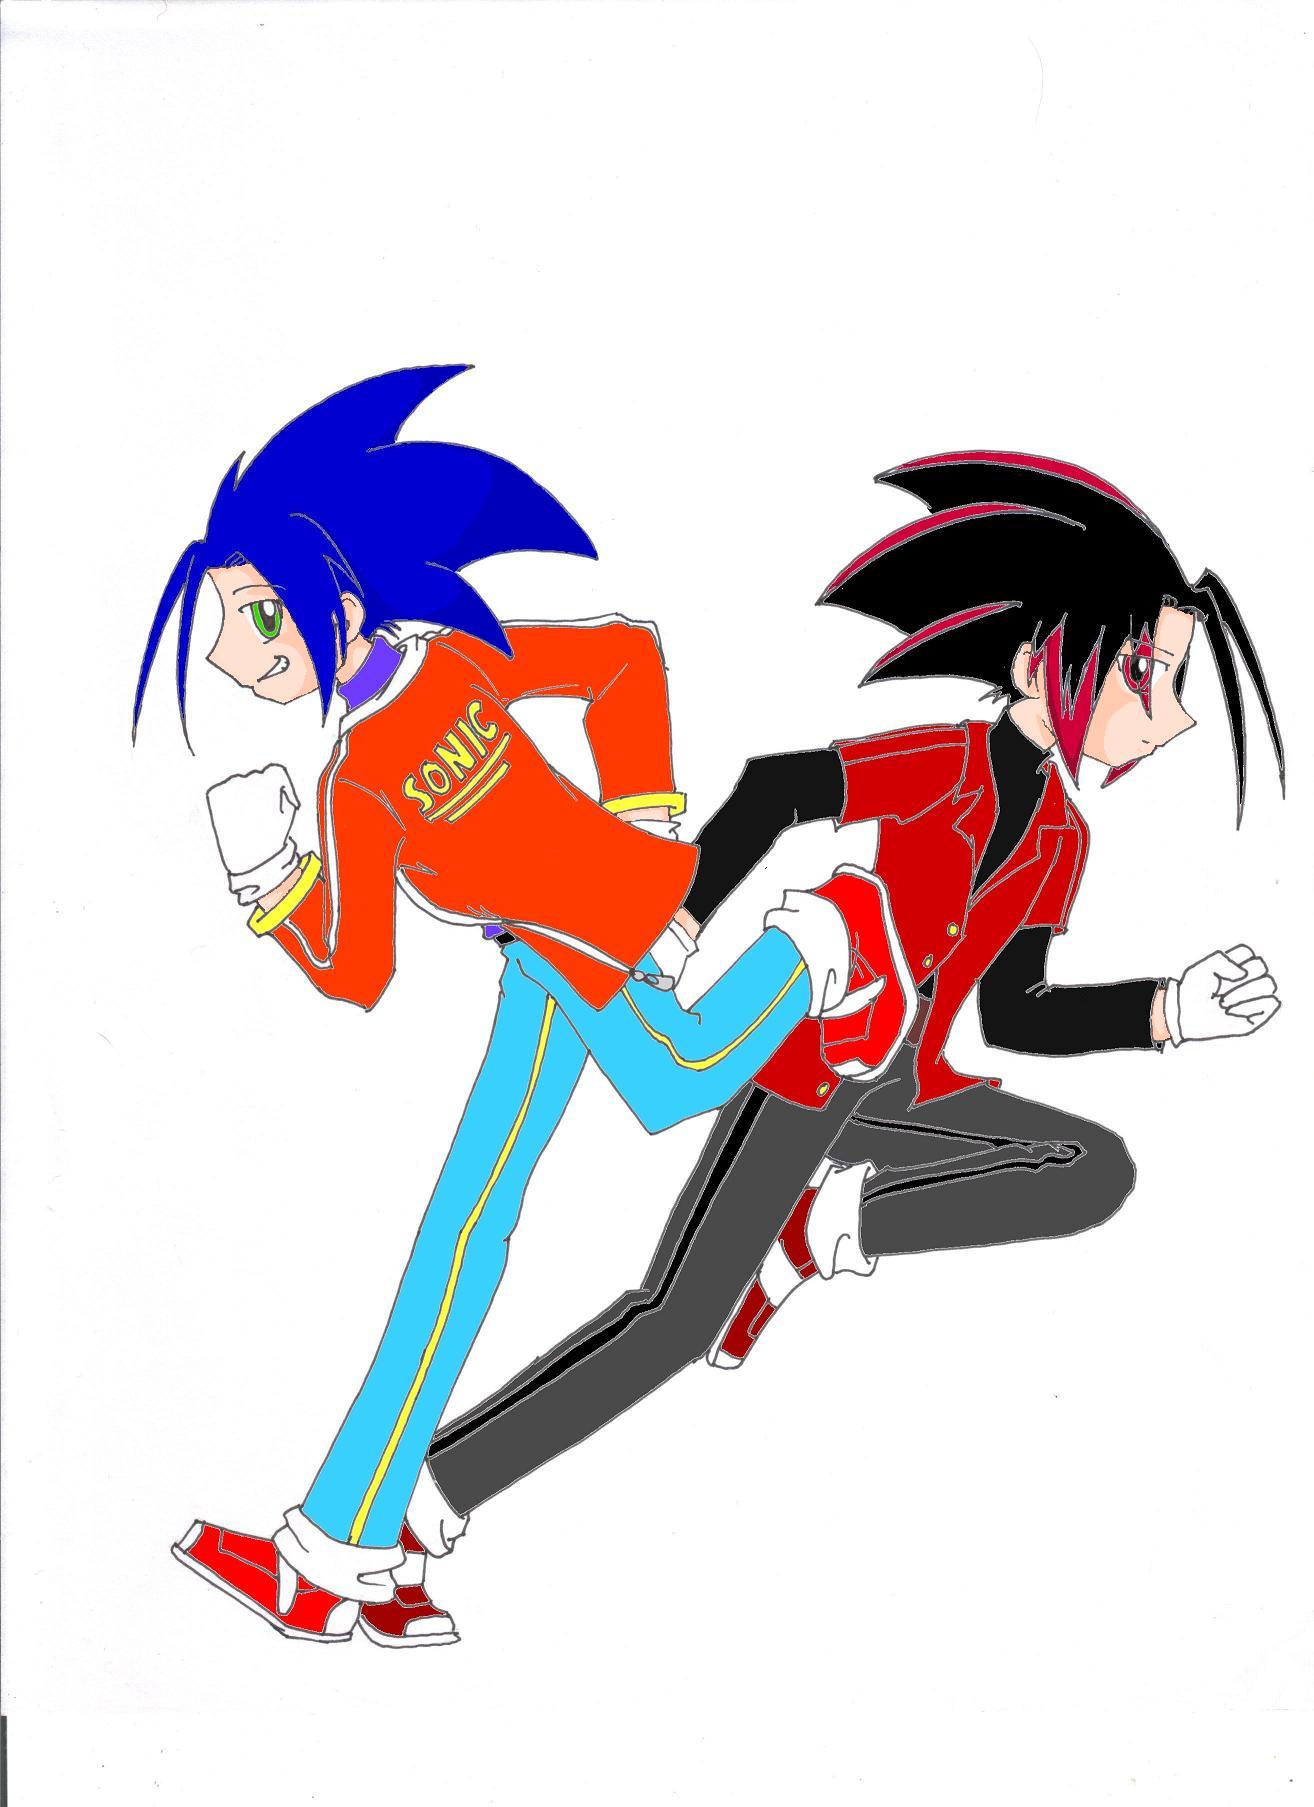 Human Sonic and Shadow (My first picture!) by Ao_bluekitsune